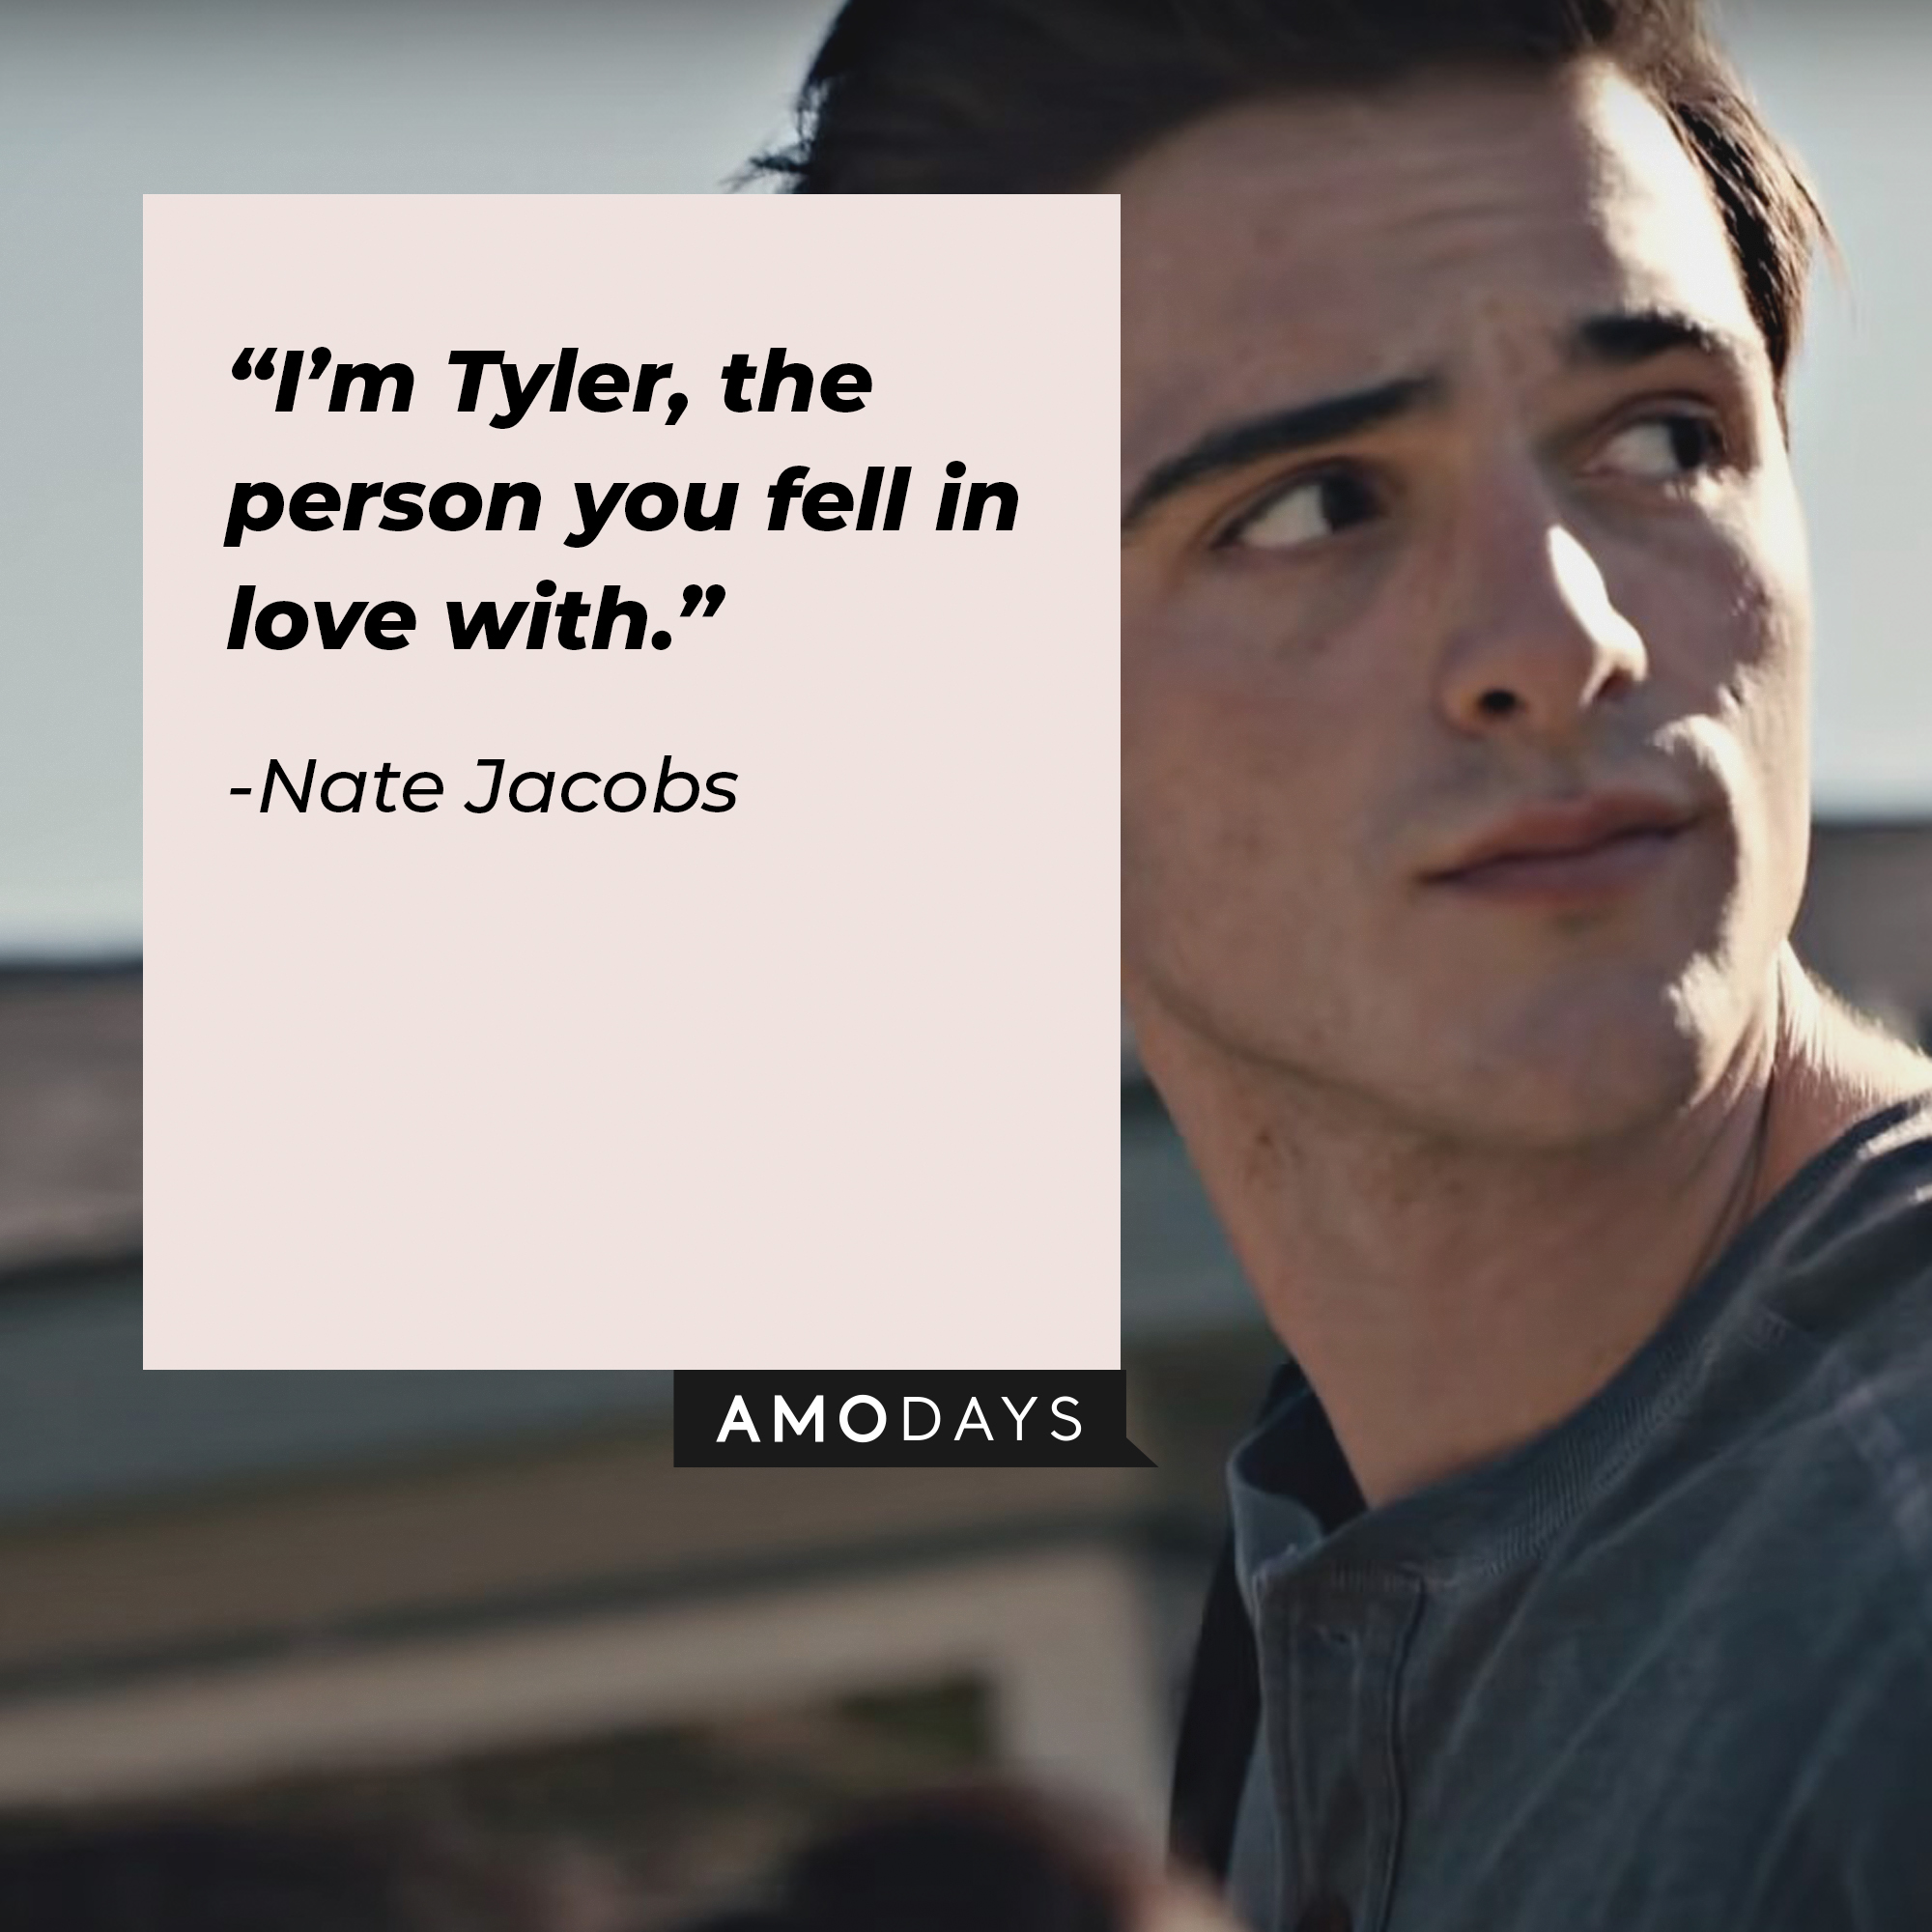 An image of Nate Jacobs with his quote: “I’m Tyler, the person you fell in love with.” | Source: facebook.com/Euphoria